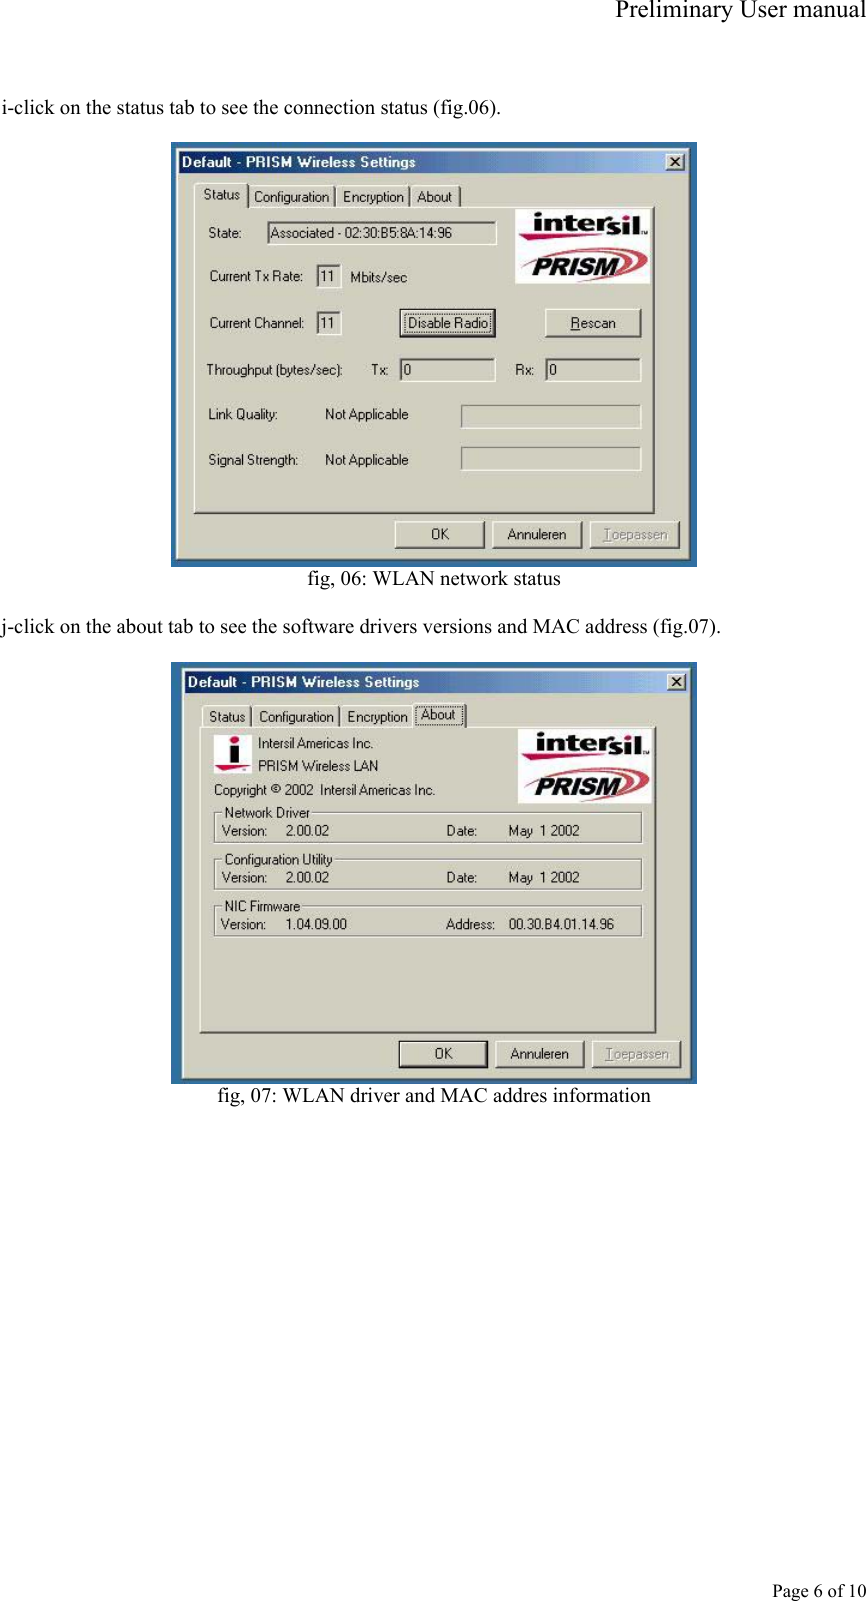 Preliminary User manual     Page 6 of 10  i-click on the status tab to see the connection status (fig.06).   fig, 06: WLAN network status  j-click on the about tab to see the software drivers versions and MAC address (fig.07).   fig, 07: WLAN driver and MAC addres information  